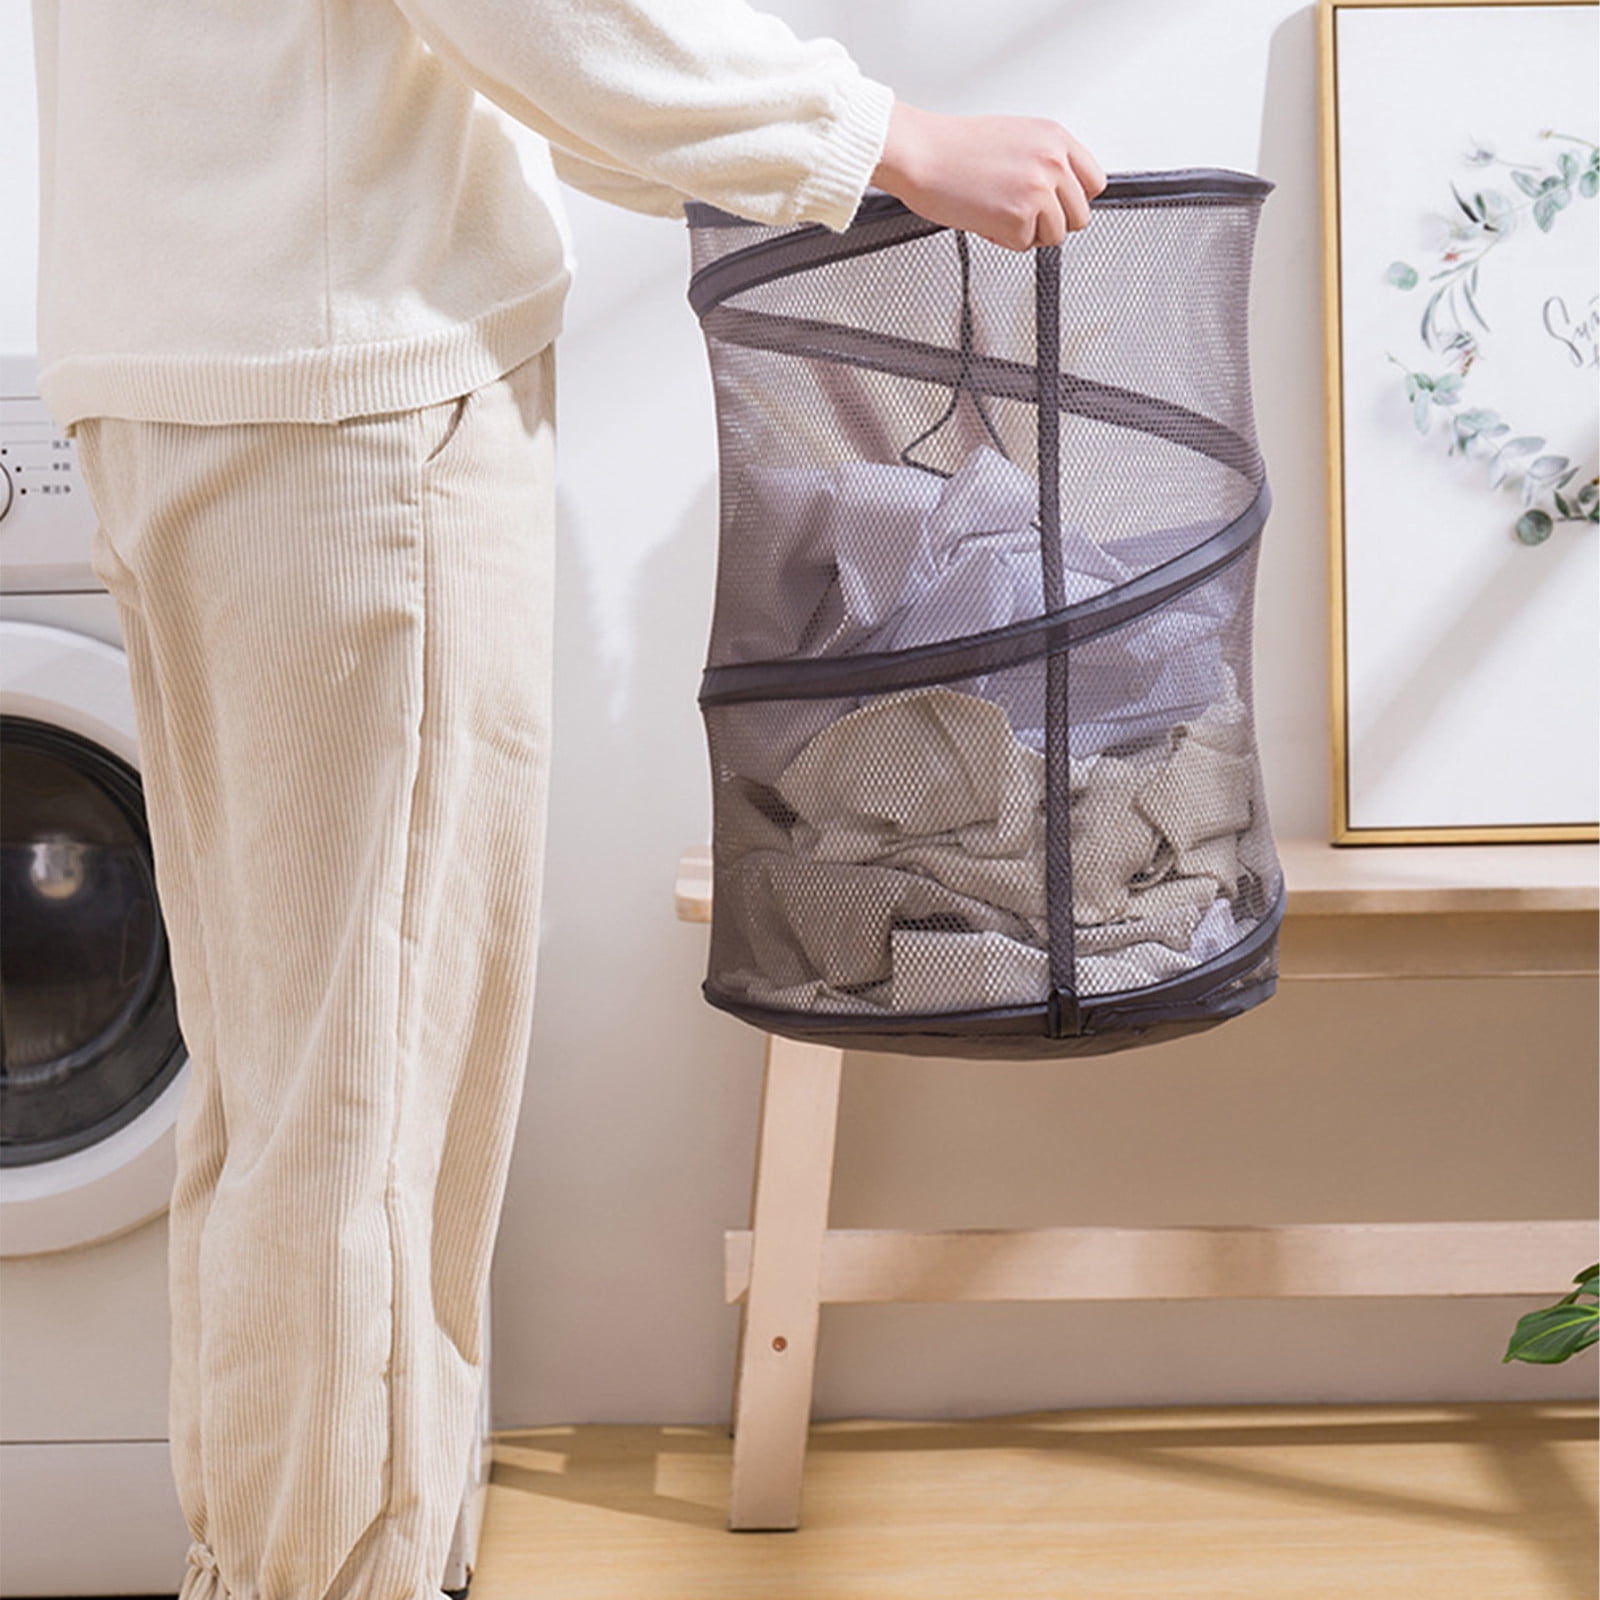 Popvcly Pop-up Folding Mesh Laundry Basket,Folding Steel Frame Toy  Container with Handle,Pocket Clothes Storage Basket. Options + Now $ 6 89.  current price Now $6.89. $8.34.  Walmart.com Show more. Popular in